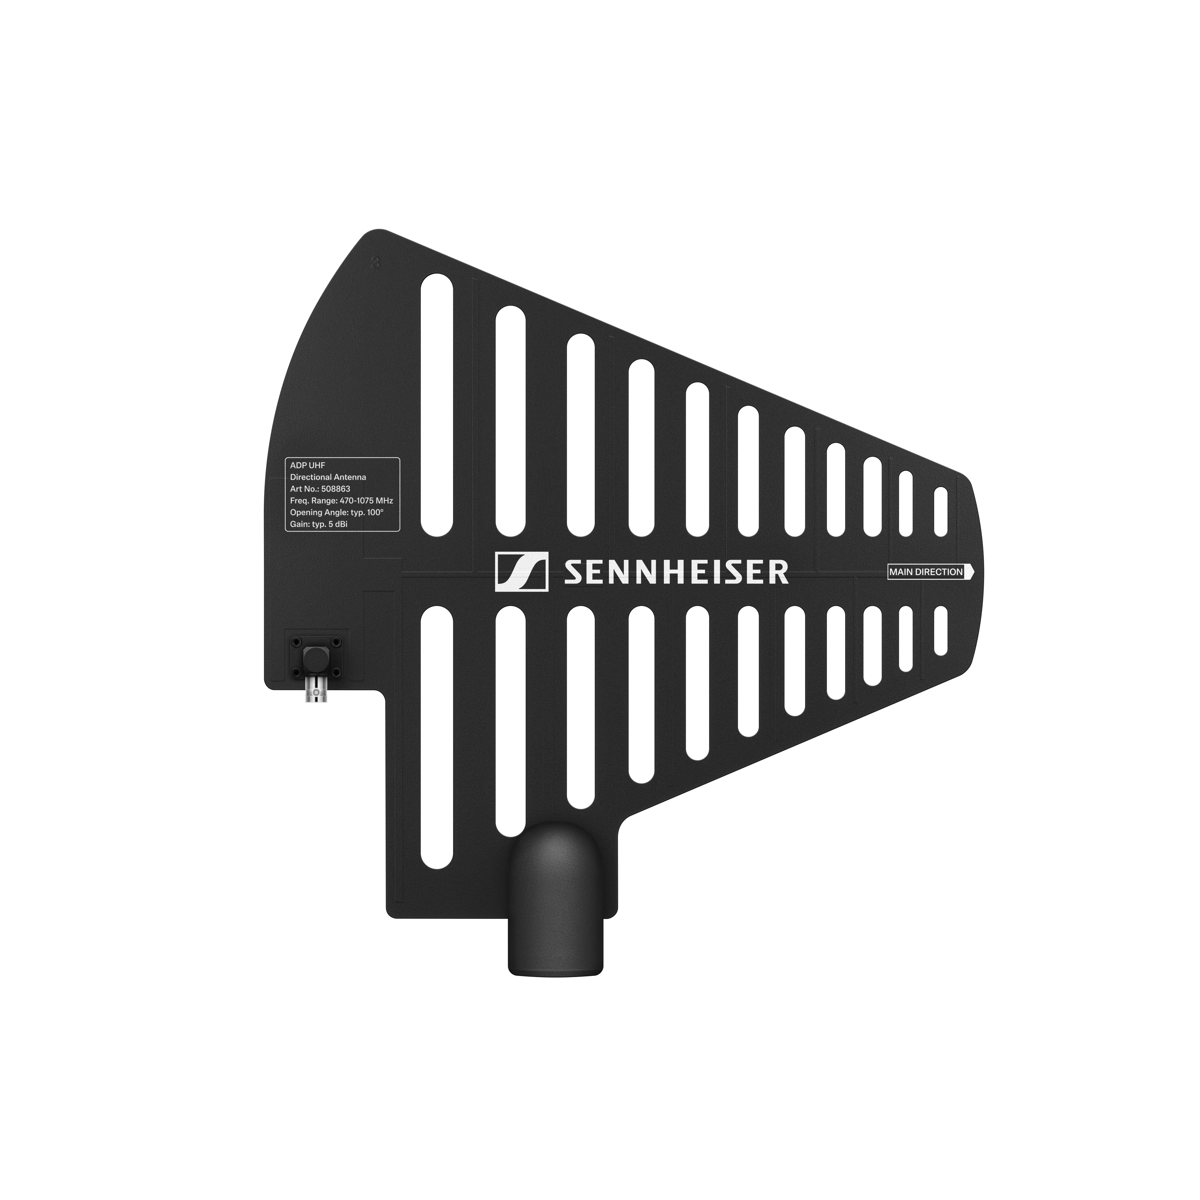 The ADP UHF remote antenna features cut-outs to reduce wind load